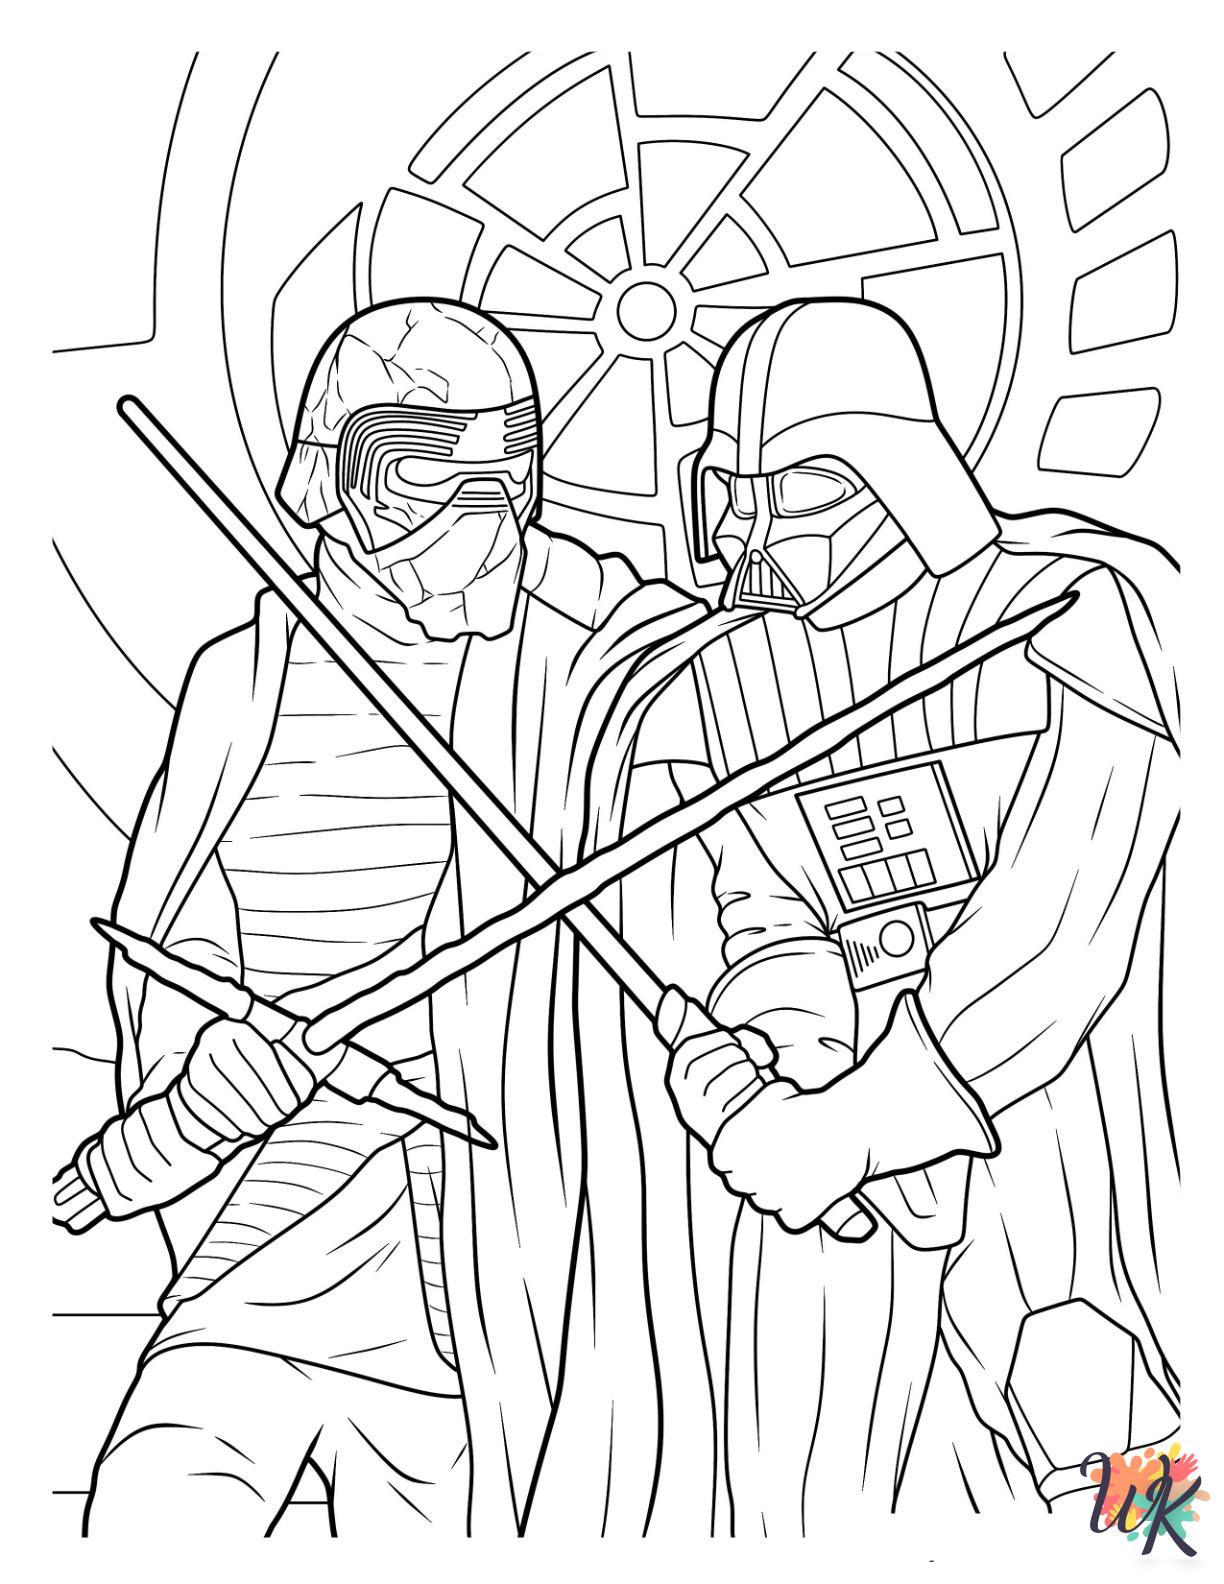 Darth Vader coloring pages for preschoolers